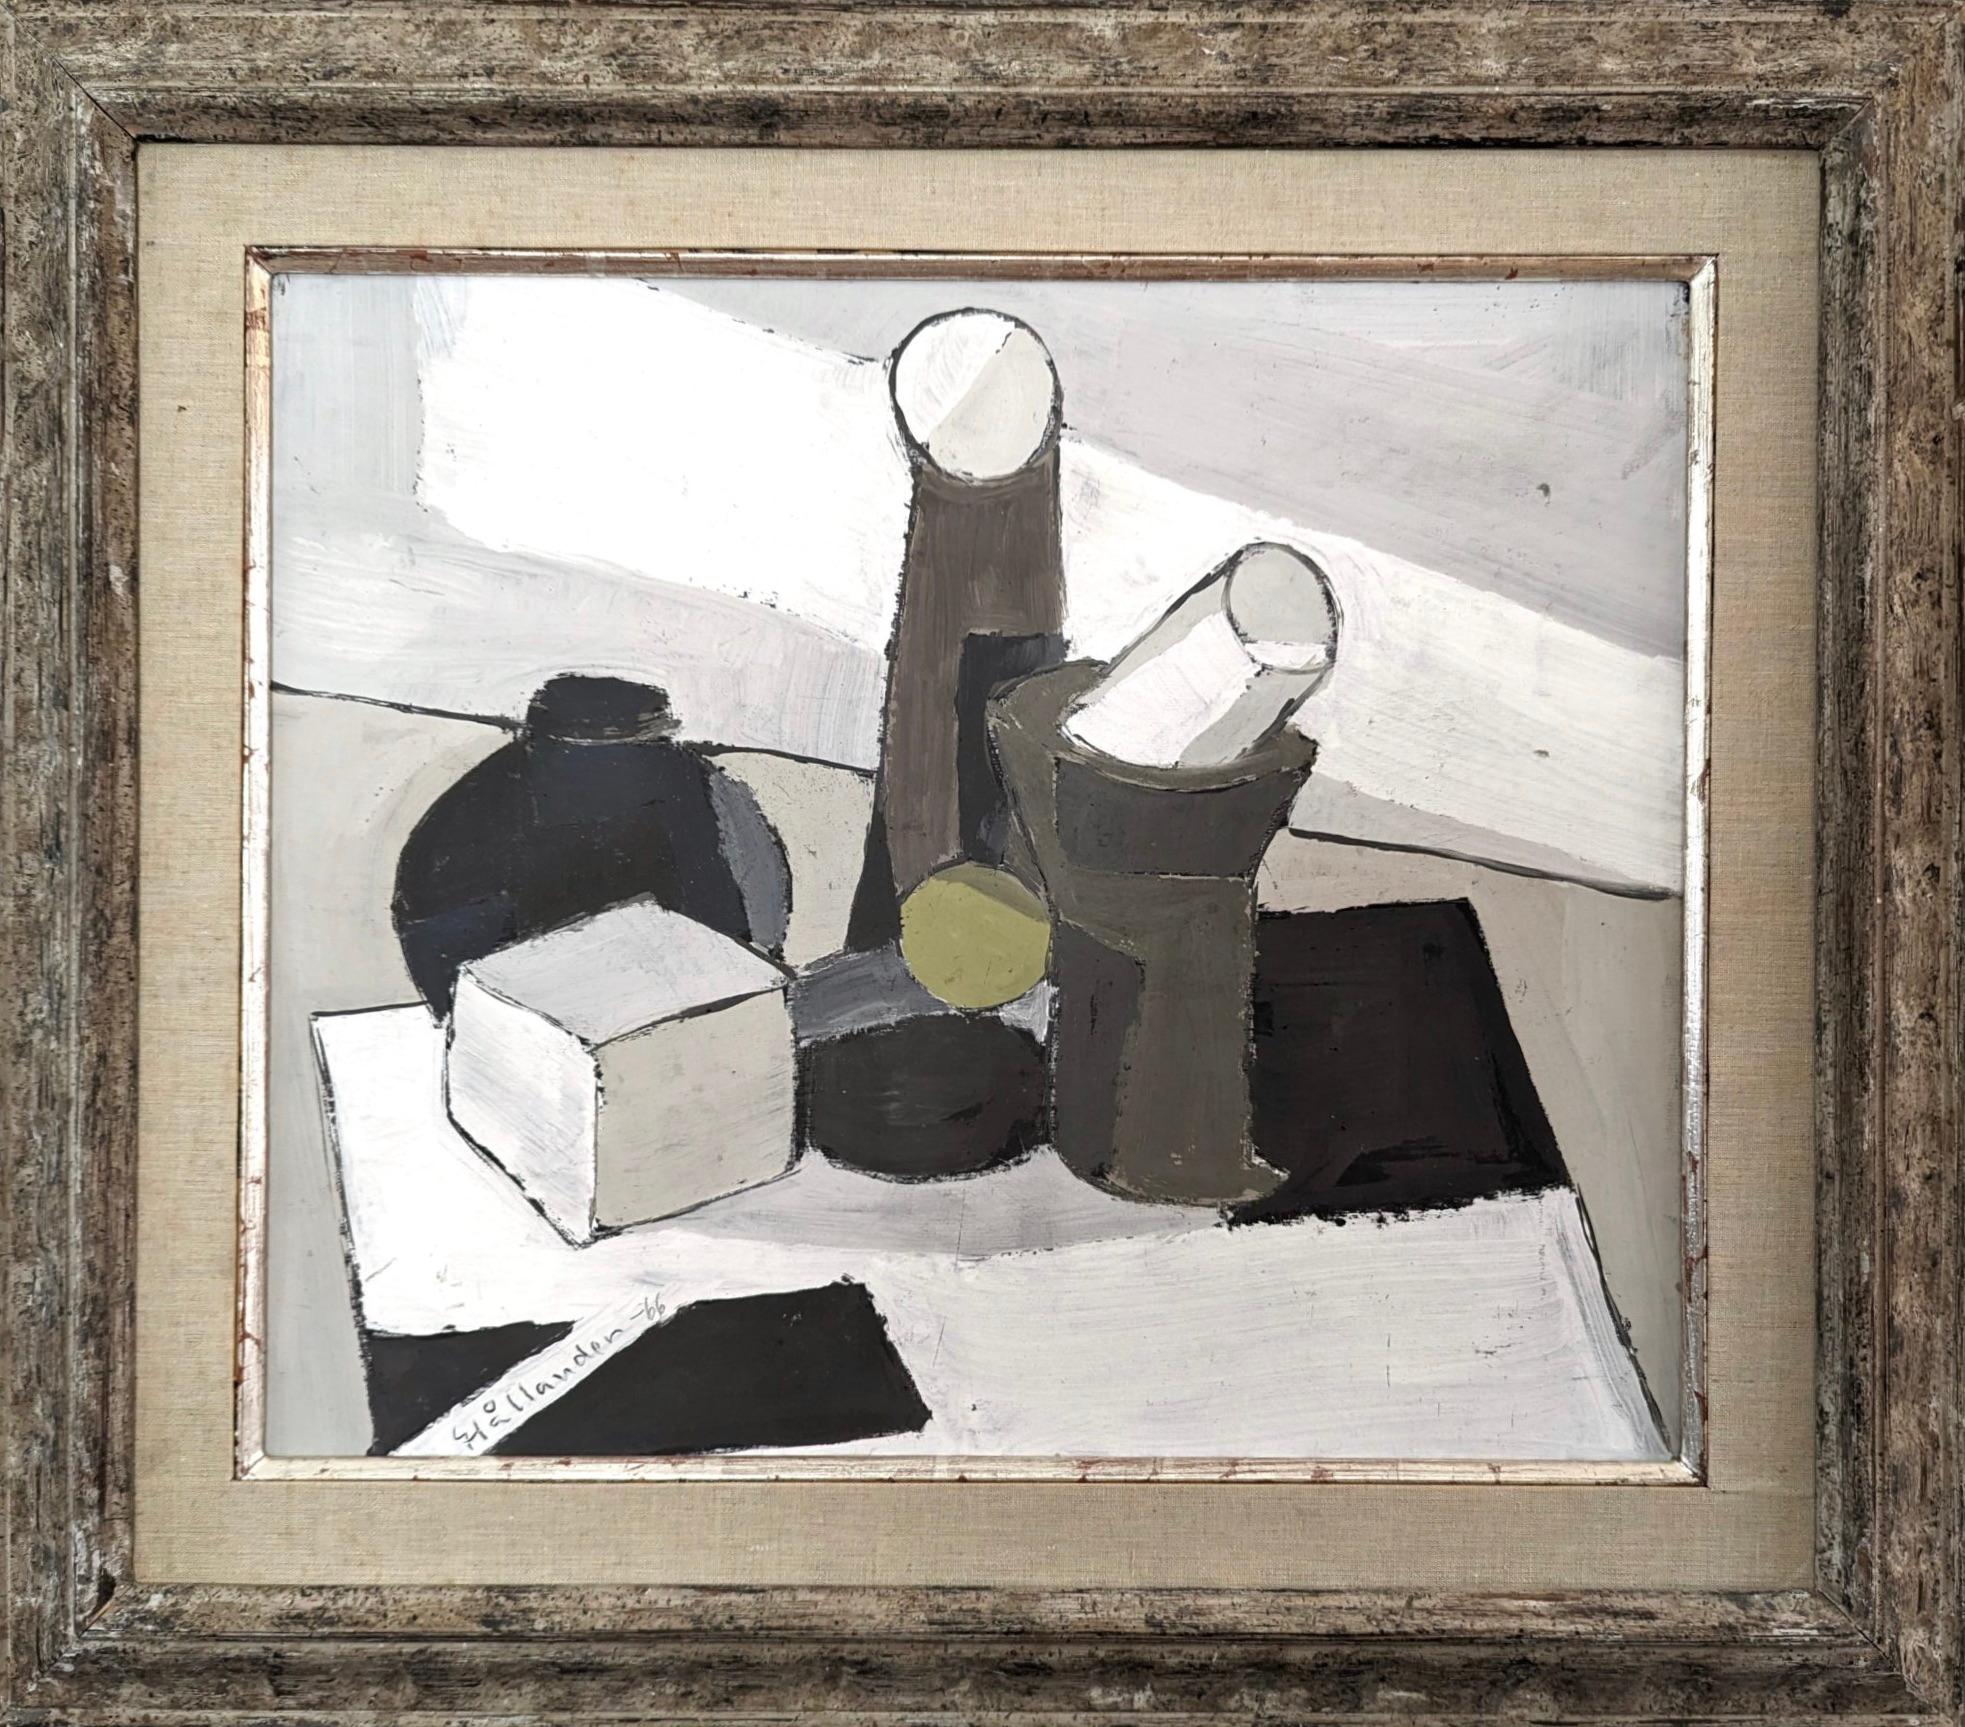 THE GREEN BALL
Size: 66 x 75 cm (including frame)
Oil on Board

A striking original mid-century modernist composition, painted onto board and dated 1966 by the established Swedish artist Gunnar Hållander (1915-1980), whose artworks have been